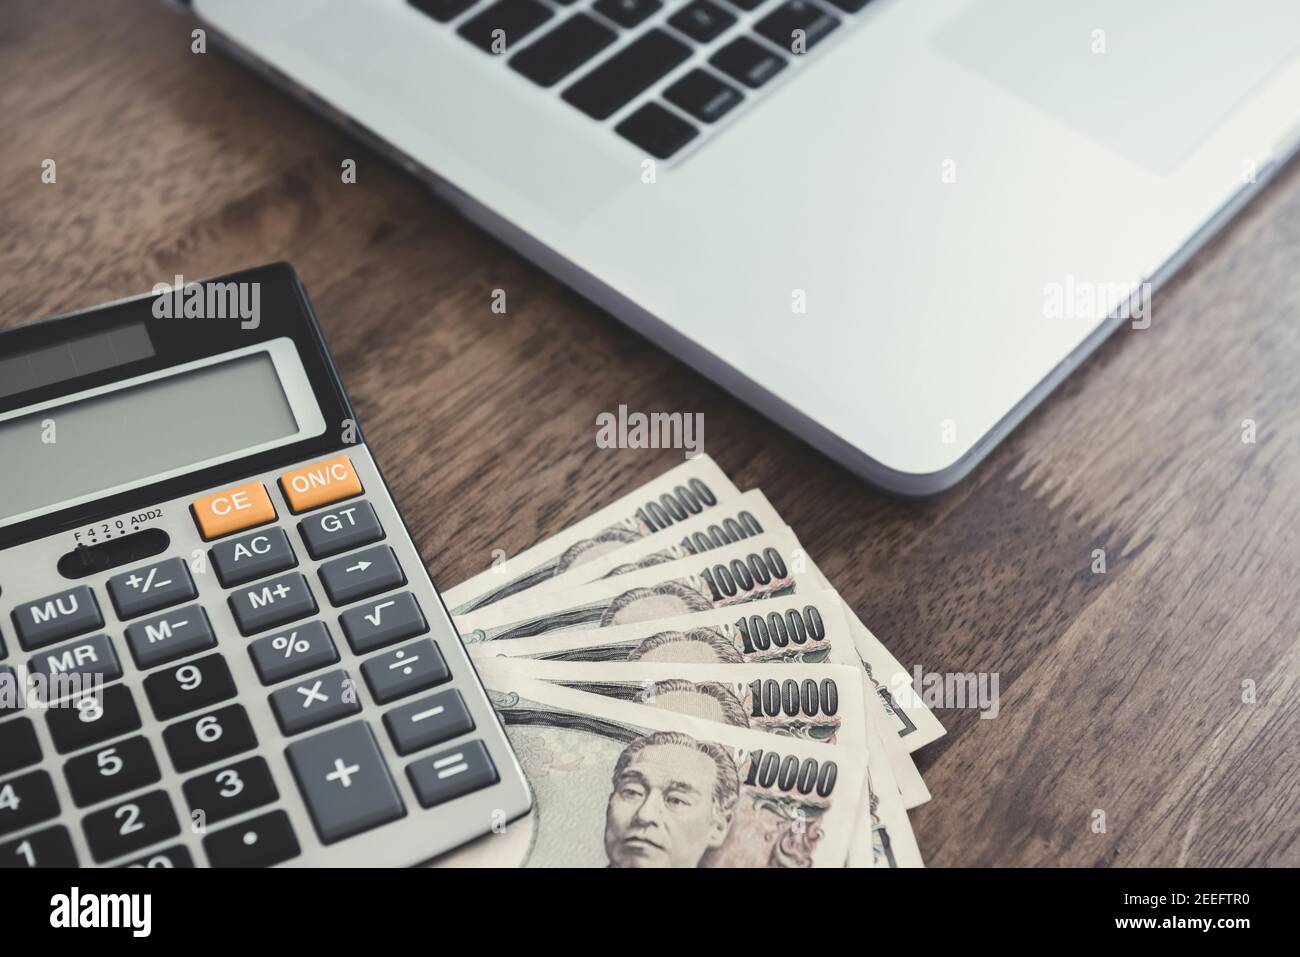 Money, Japanese yen banknotes, with calculator and notebook computer on wooden table Stock Photo